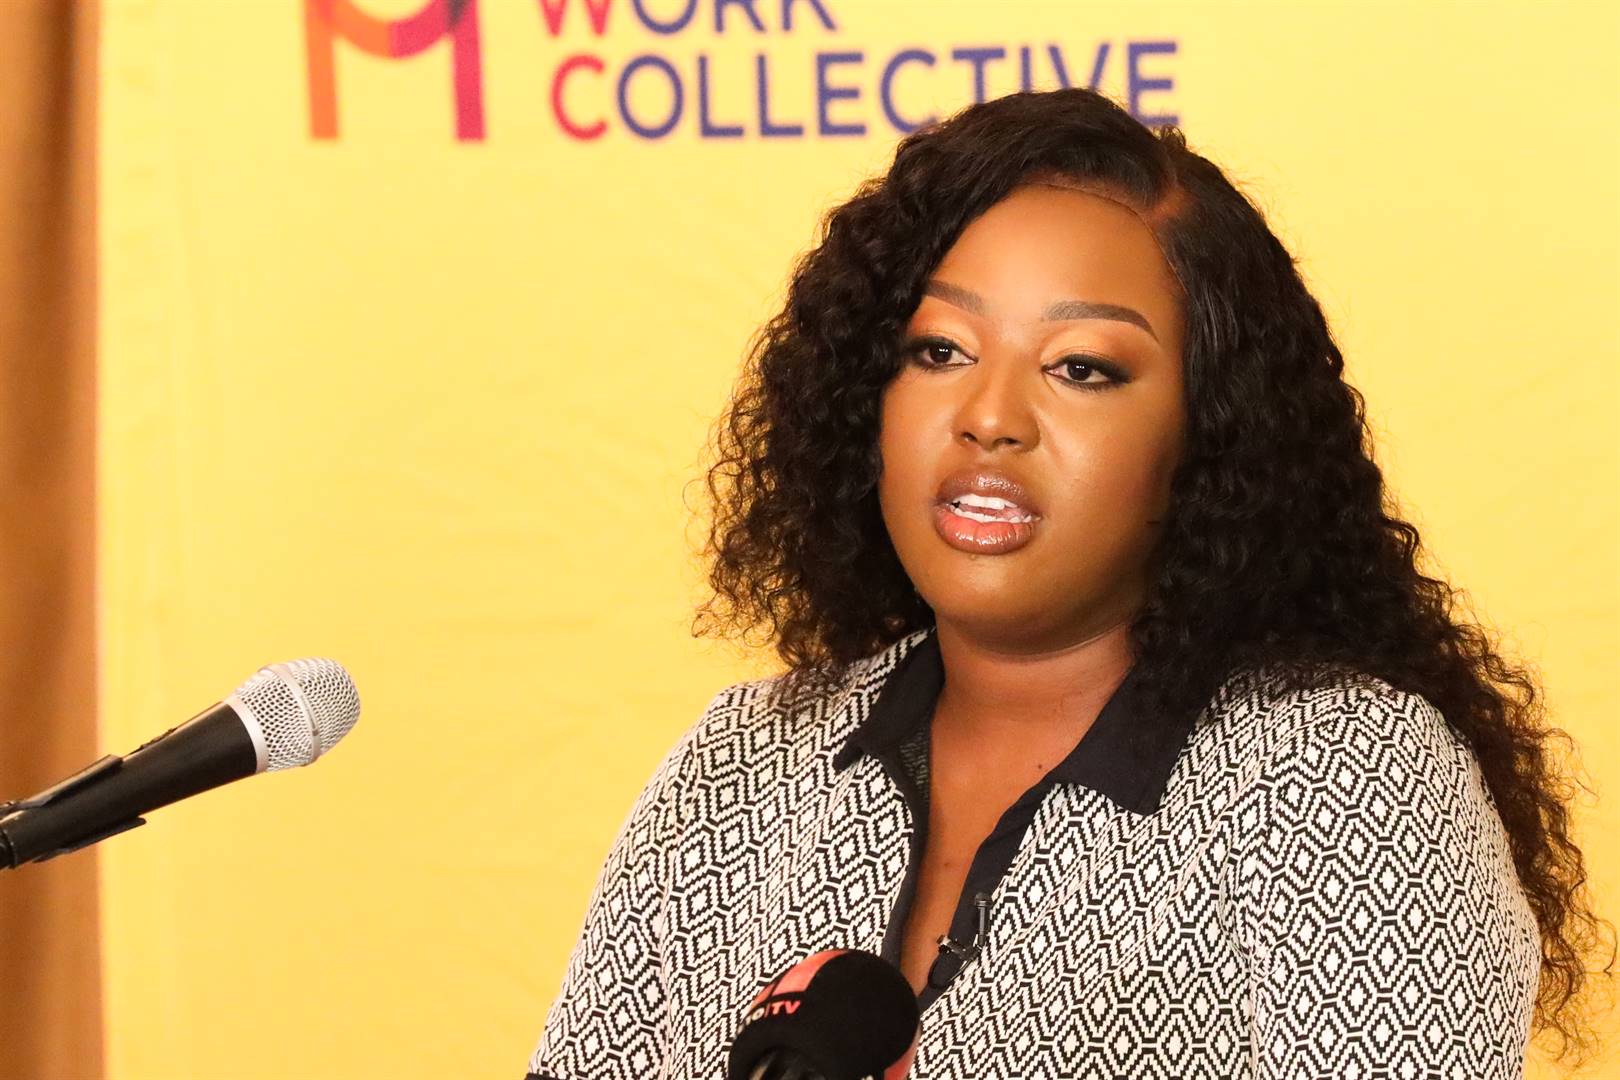 Mbali Ntuli launches her new community development organisation Ground Work Collective at The Rand Club, Johannesburg, this week. The initiative aims to work with community leaders across SA to harness their potential to realise change.